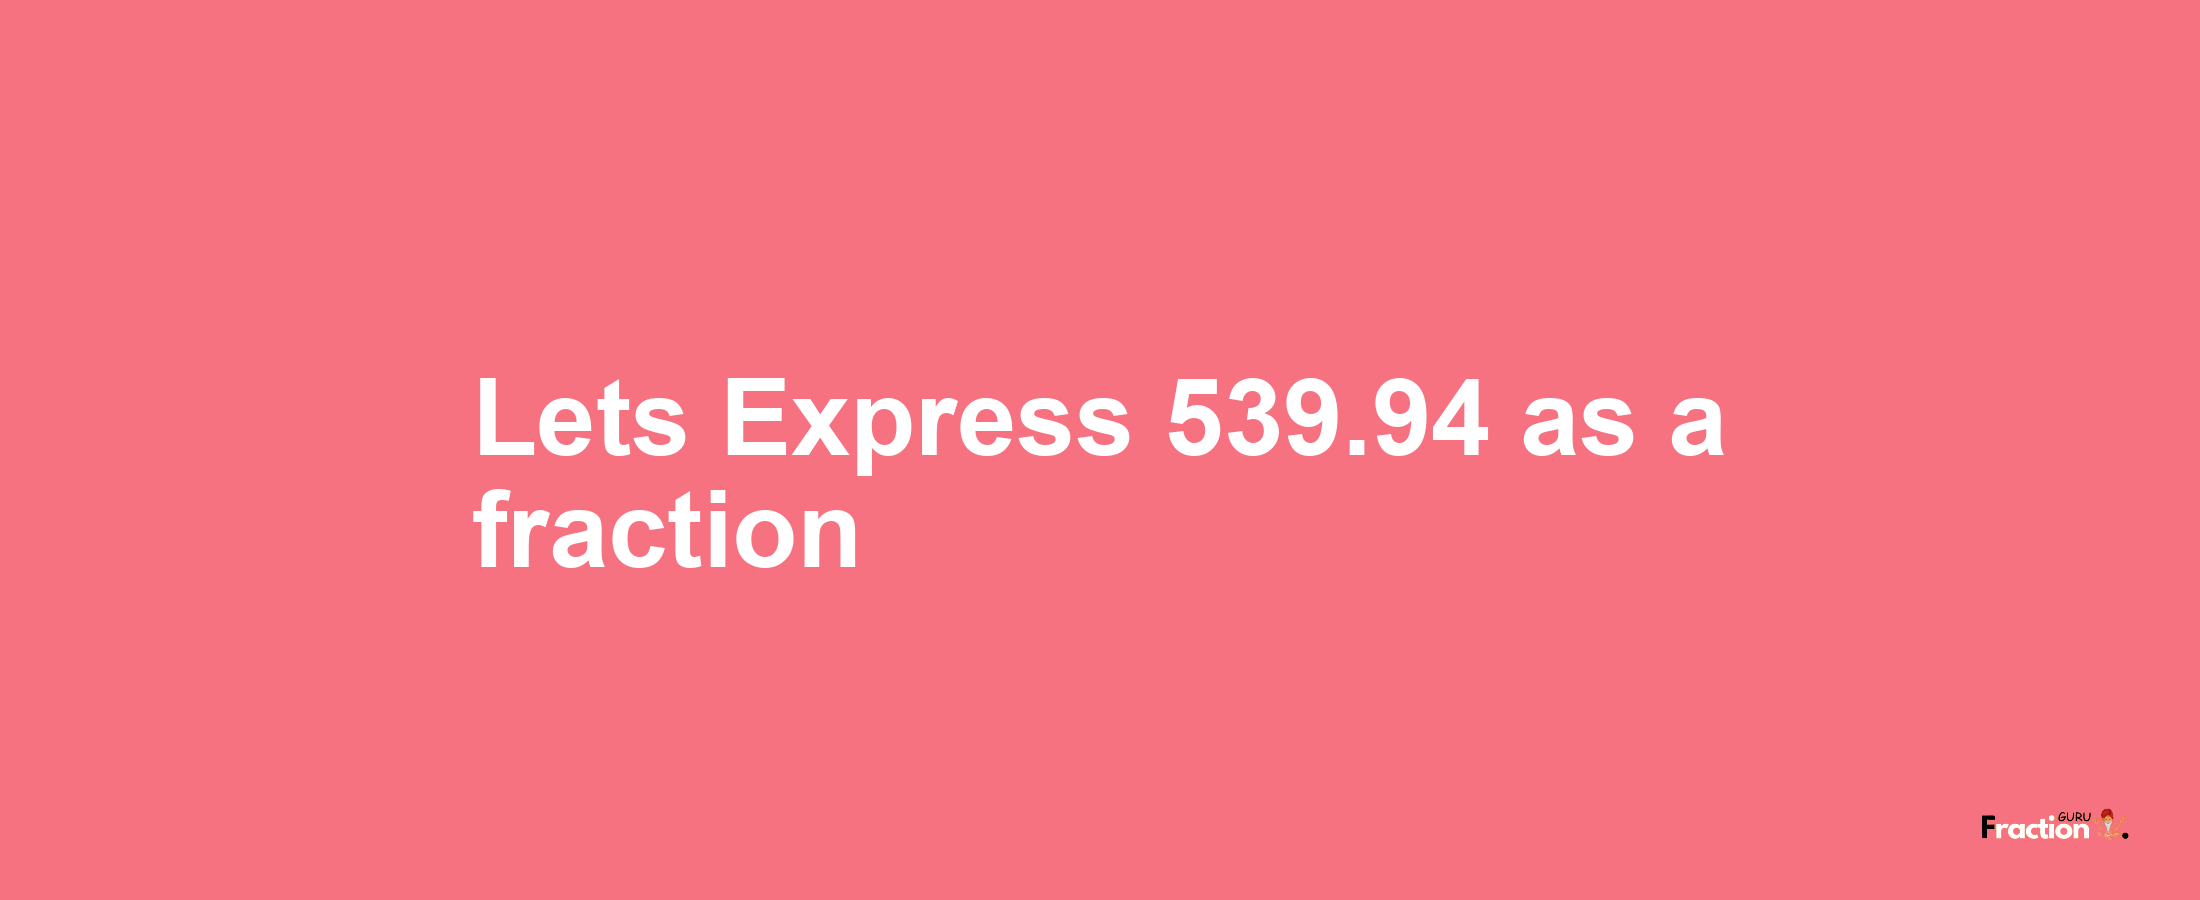 Lets Express 539.94 as afraction